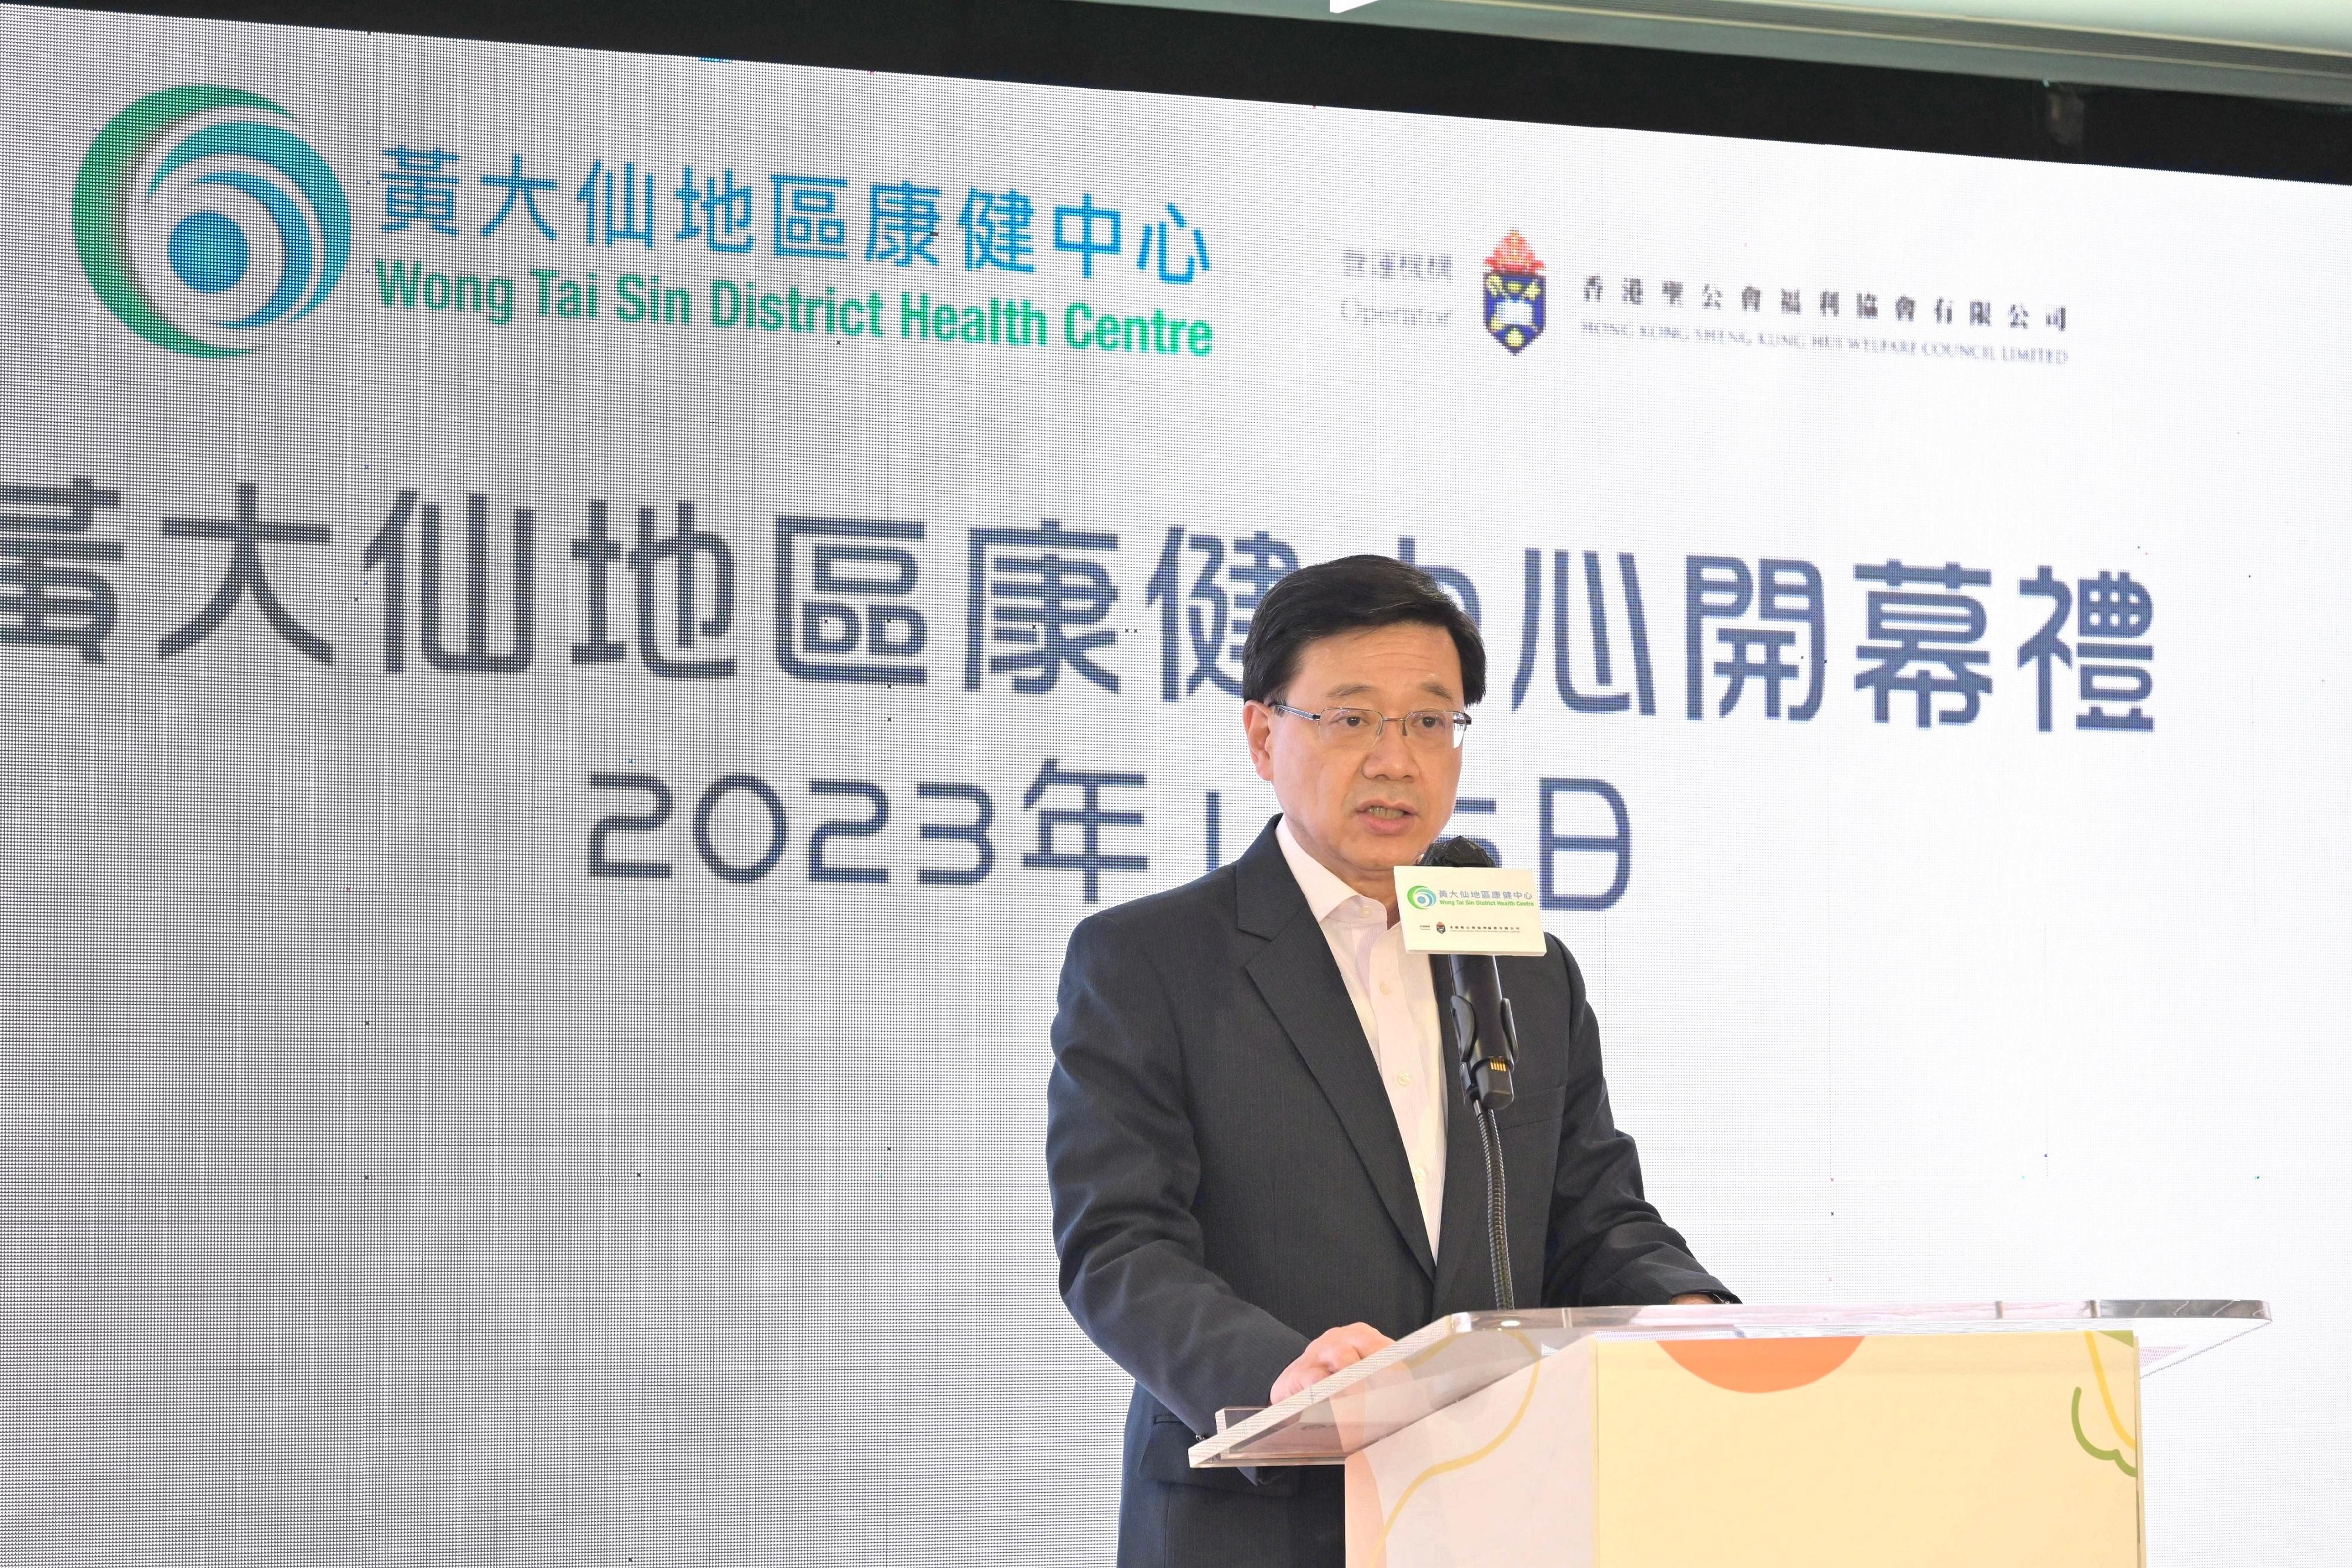 The Chief Executive, Mr John Lee, speaks at the opening ceremony of the Wong Tai Sin District Health Centre today (January 6).